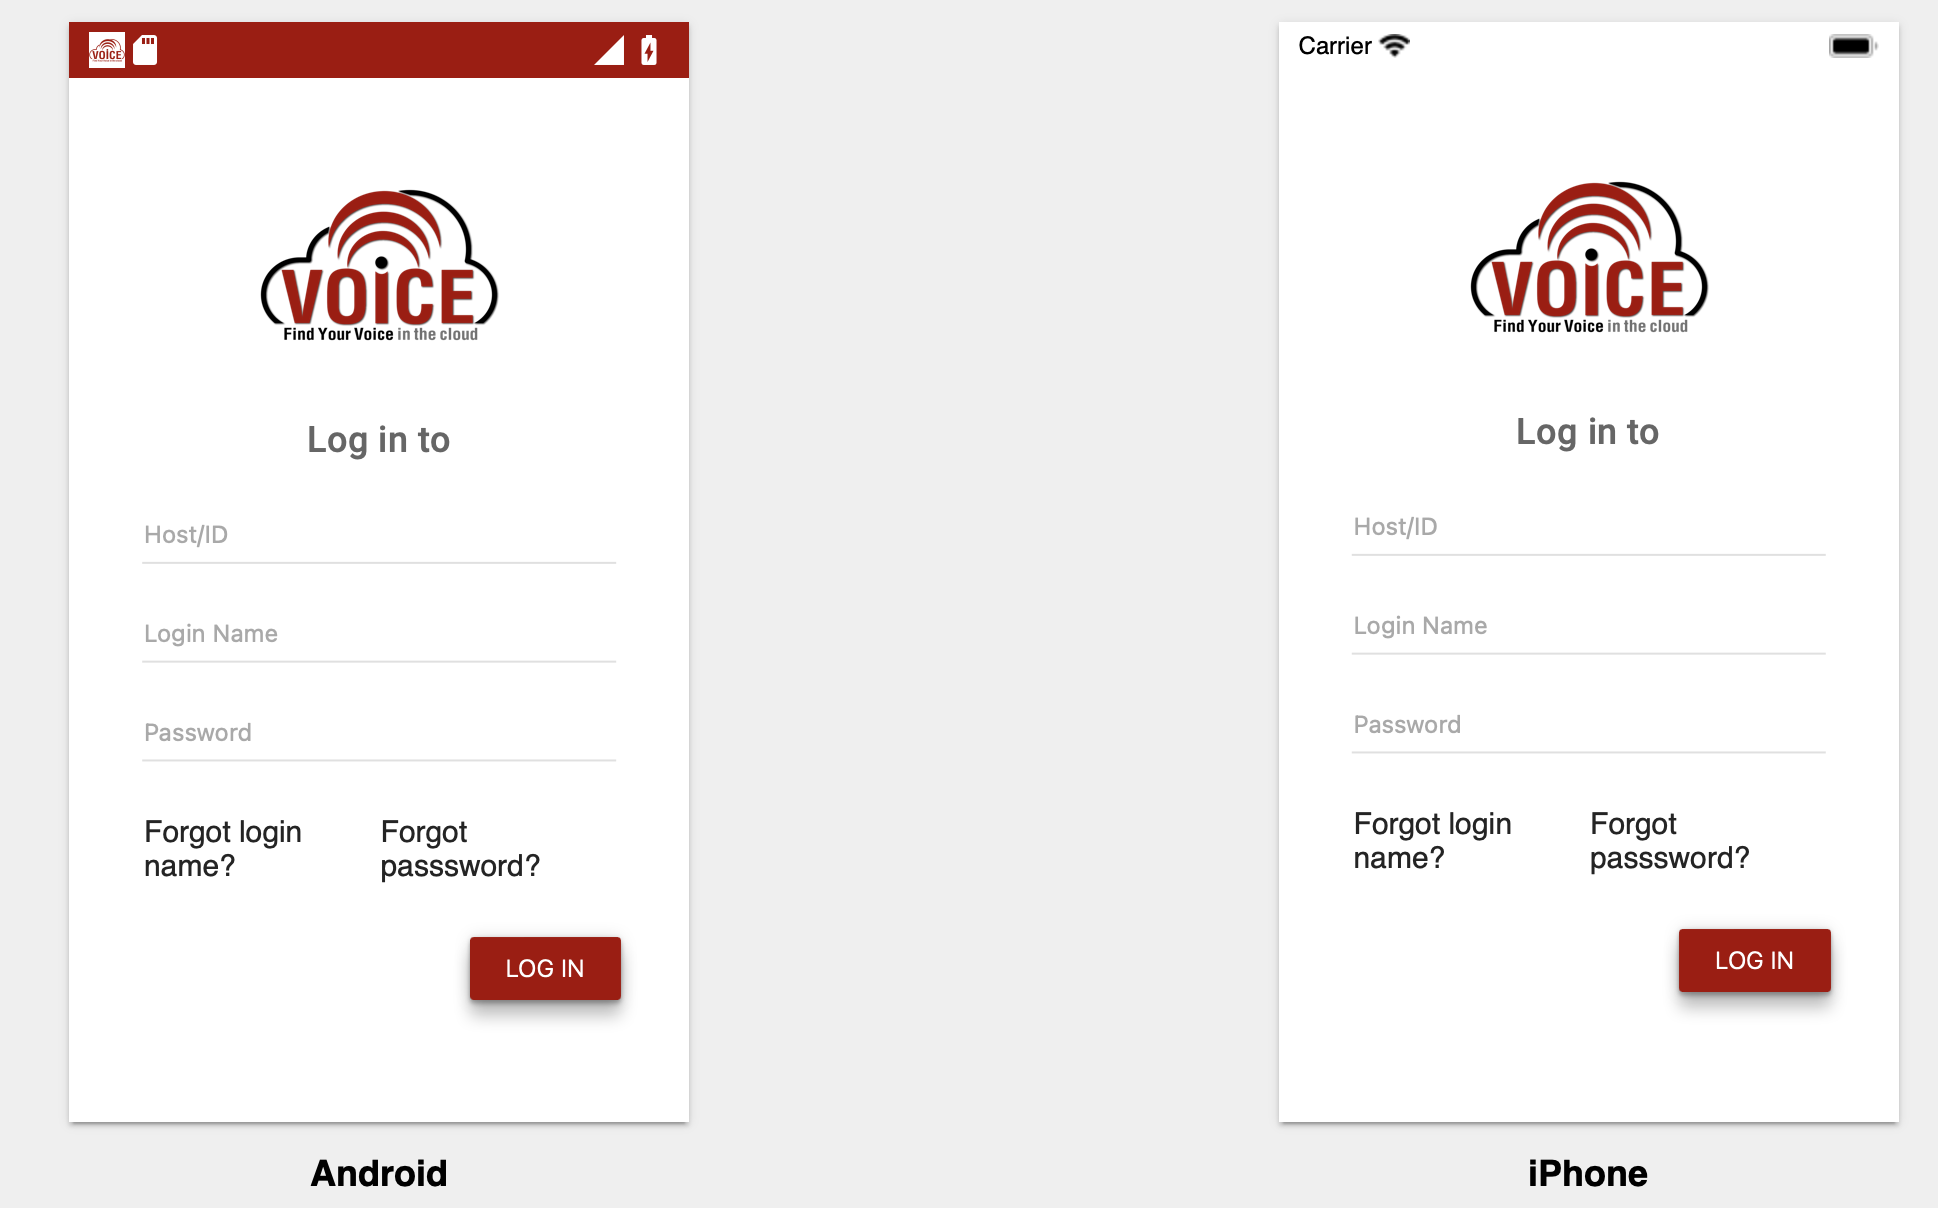 AbsoluteVOICE Android and iPhone Login Screens